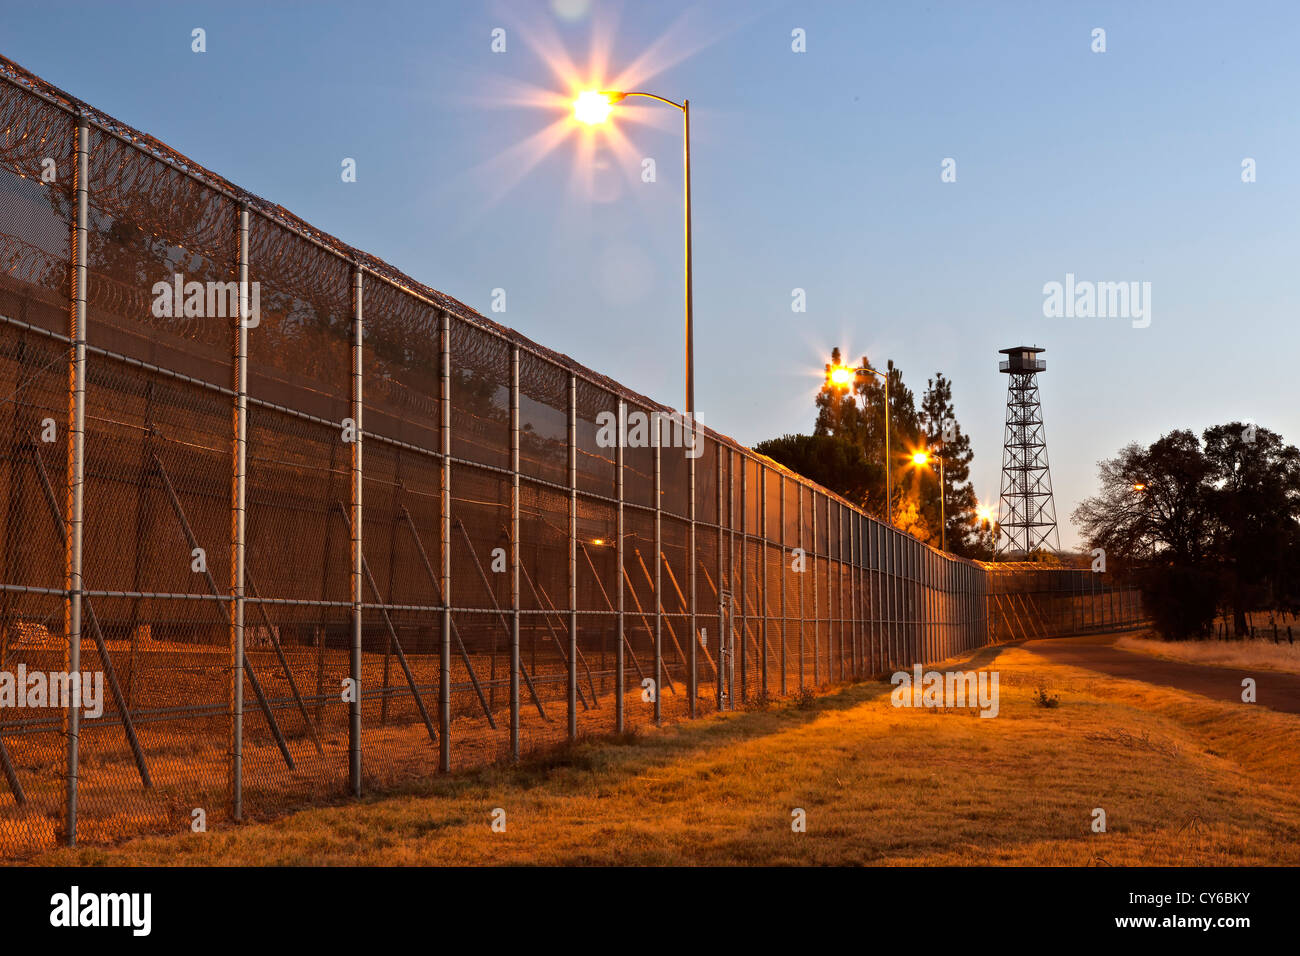 Prison security fence,  guard tower, before sunrise. Stock Photo